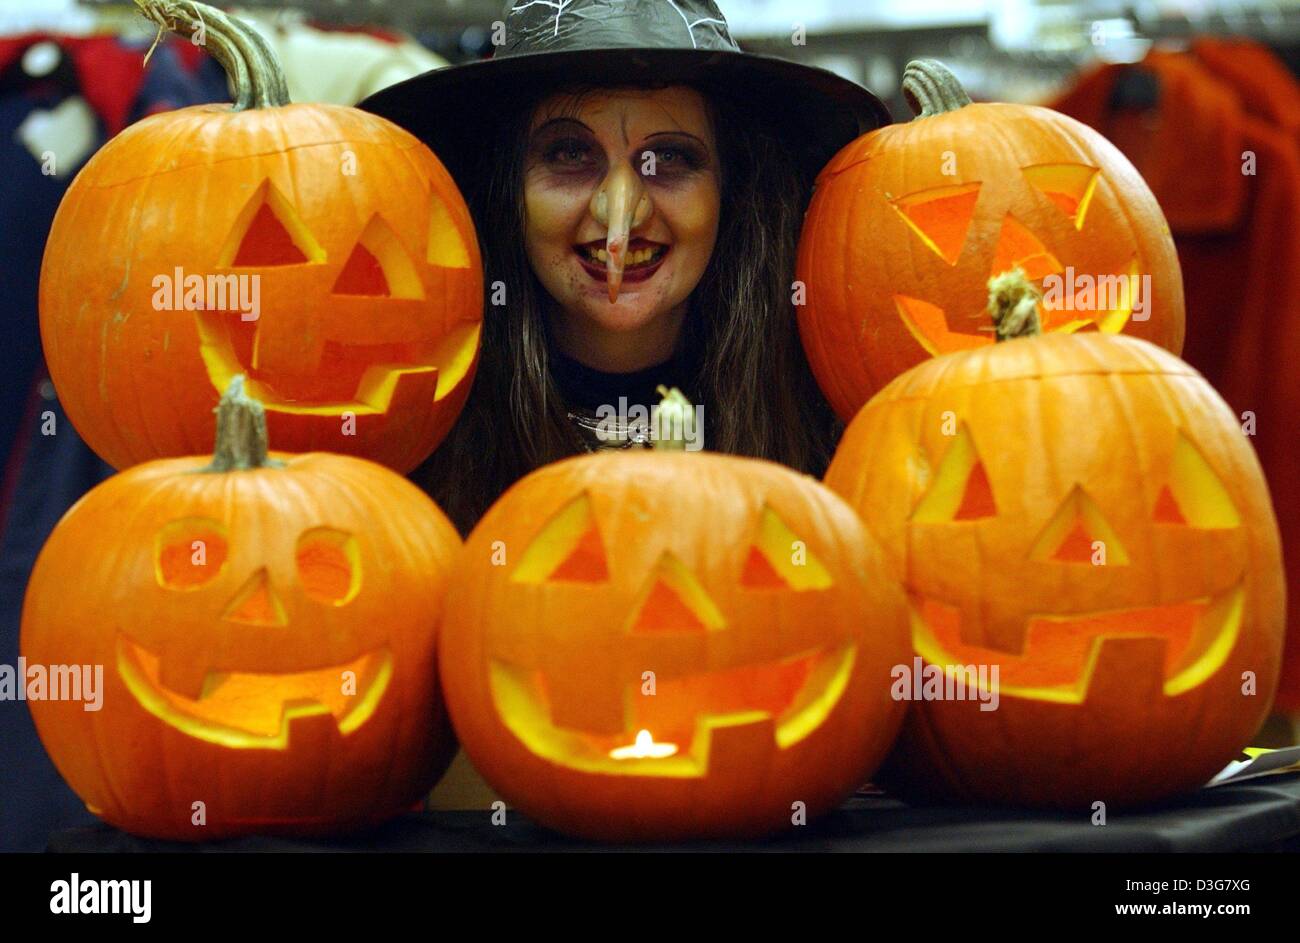 (dpa) - A shop assistant dressed up as a witch is scaring the customers in a Wal Mart supermarket in Hamburg, 31 October 2003. At the entrance, customers had to pass through a dark tunnel of horror draped with cobwebs and it became evident that shopping on Halloween was not a task for anxious people. Inside, the customers were greeted by a devil and for information they had to turn Stock Photo